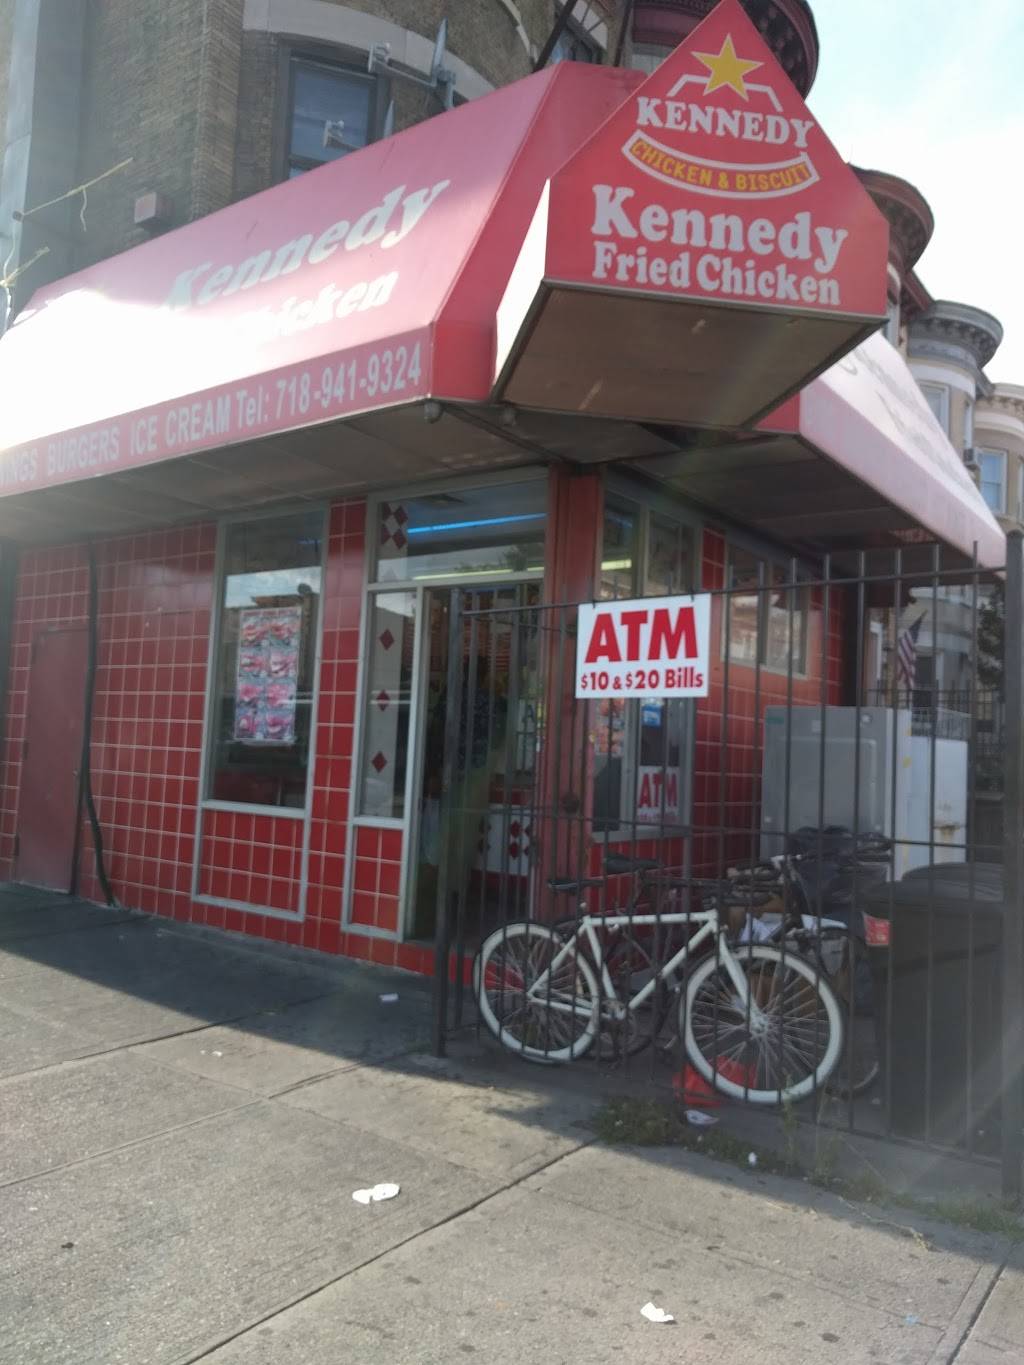 Kennedy Fried Chicken | restaurant | 1676 Nostrand Ave, Brooklyn, NY 11226, USA | 7189419324 OR +1 718-941-9324